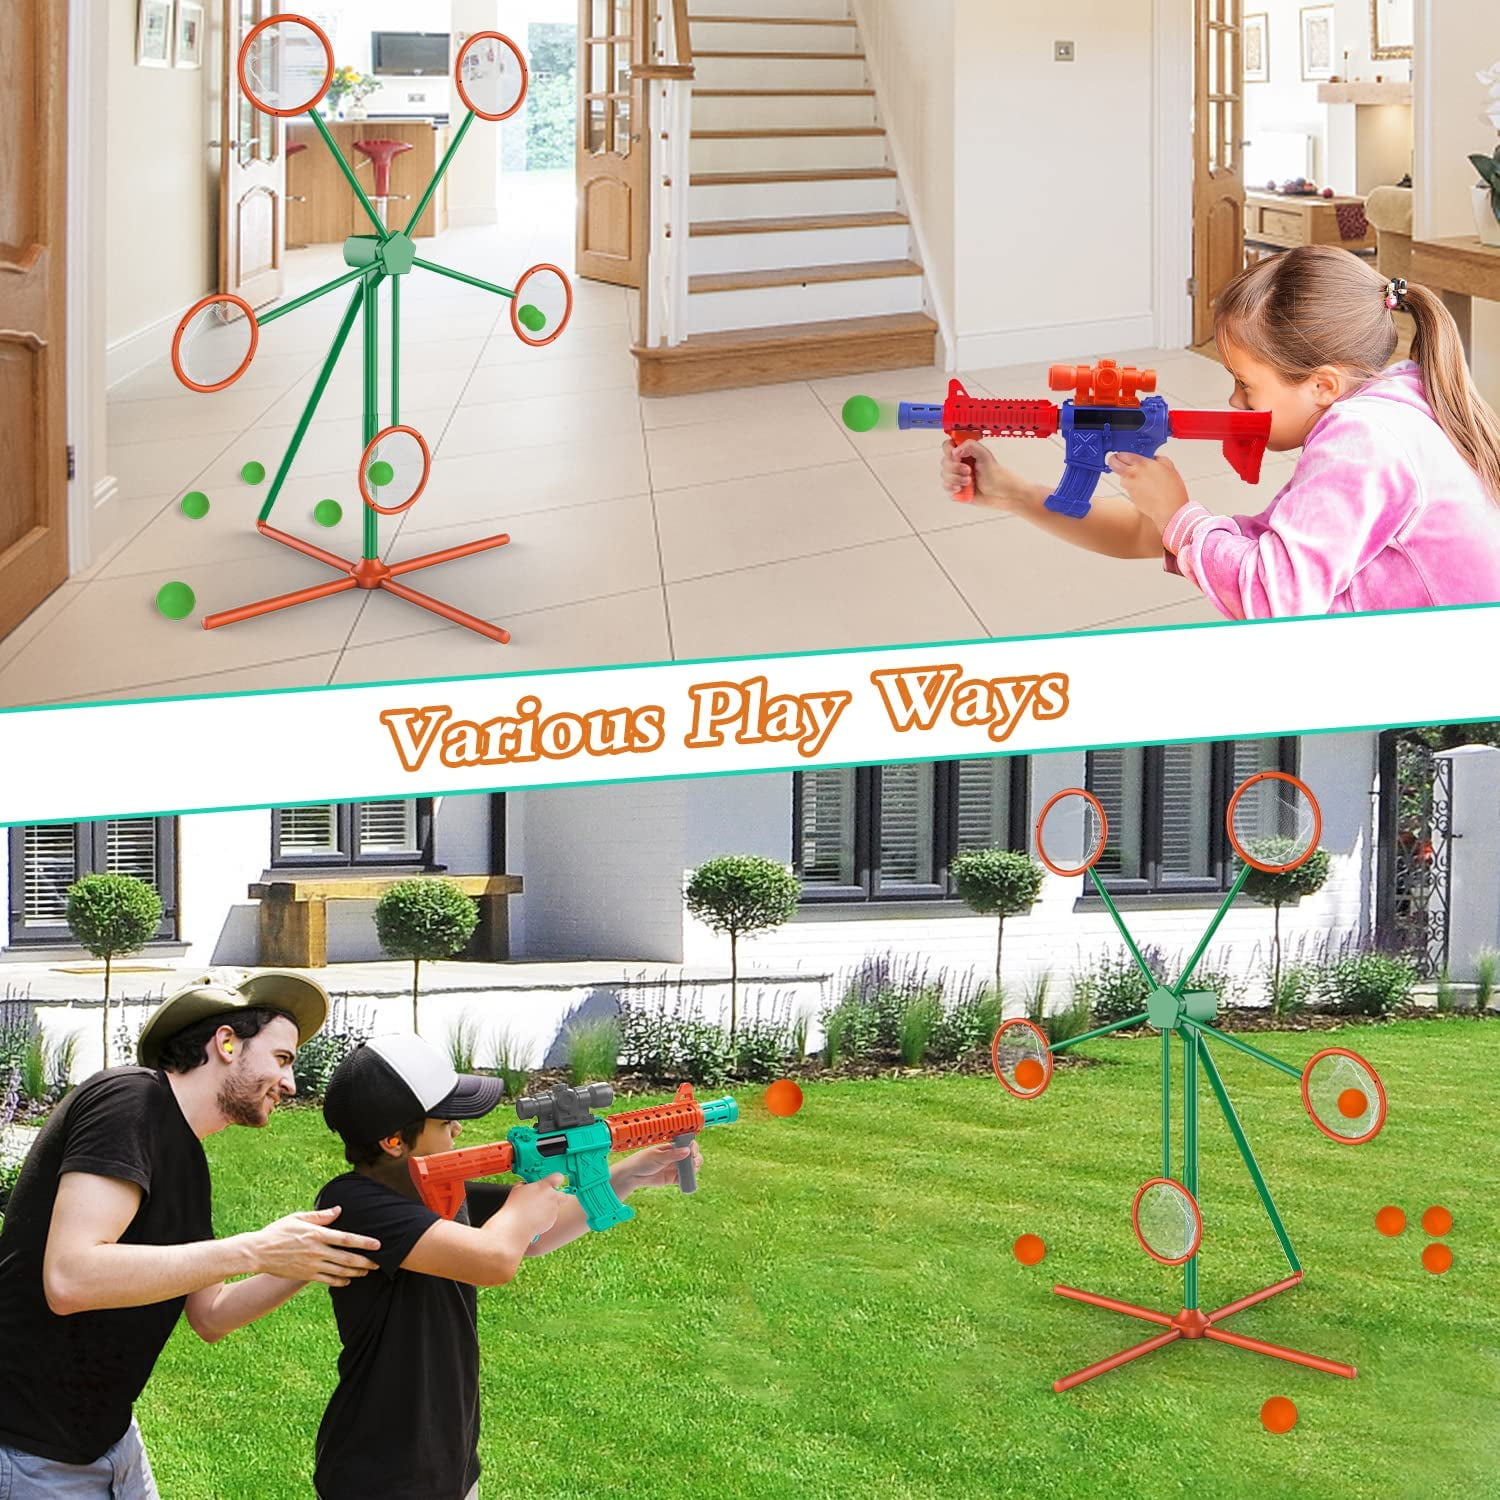  [2023 New] Toy Gun for Age 5 6 7 8 9 10 Years Old Boys Girls,  Best Kid Shooting Game Toys with Moving Shooting Target 2 Popper Air Guns  48 Foam